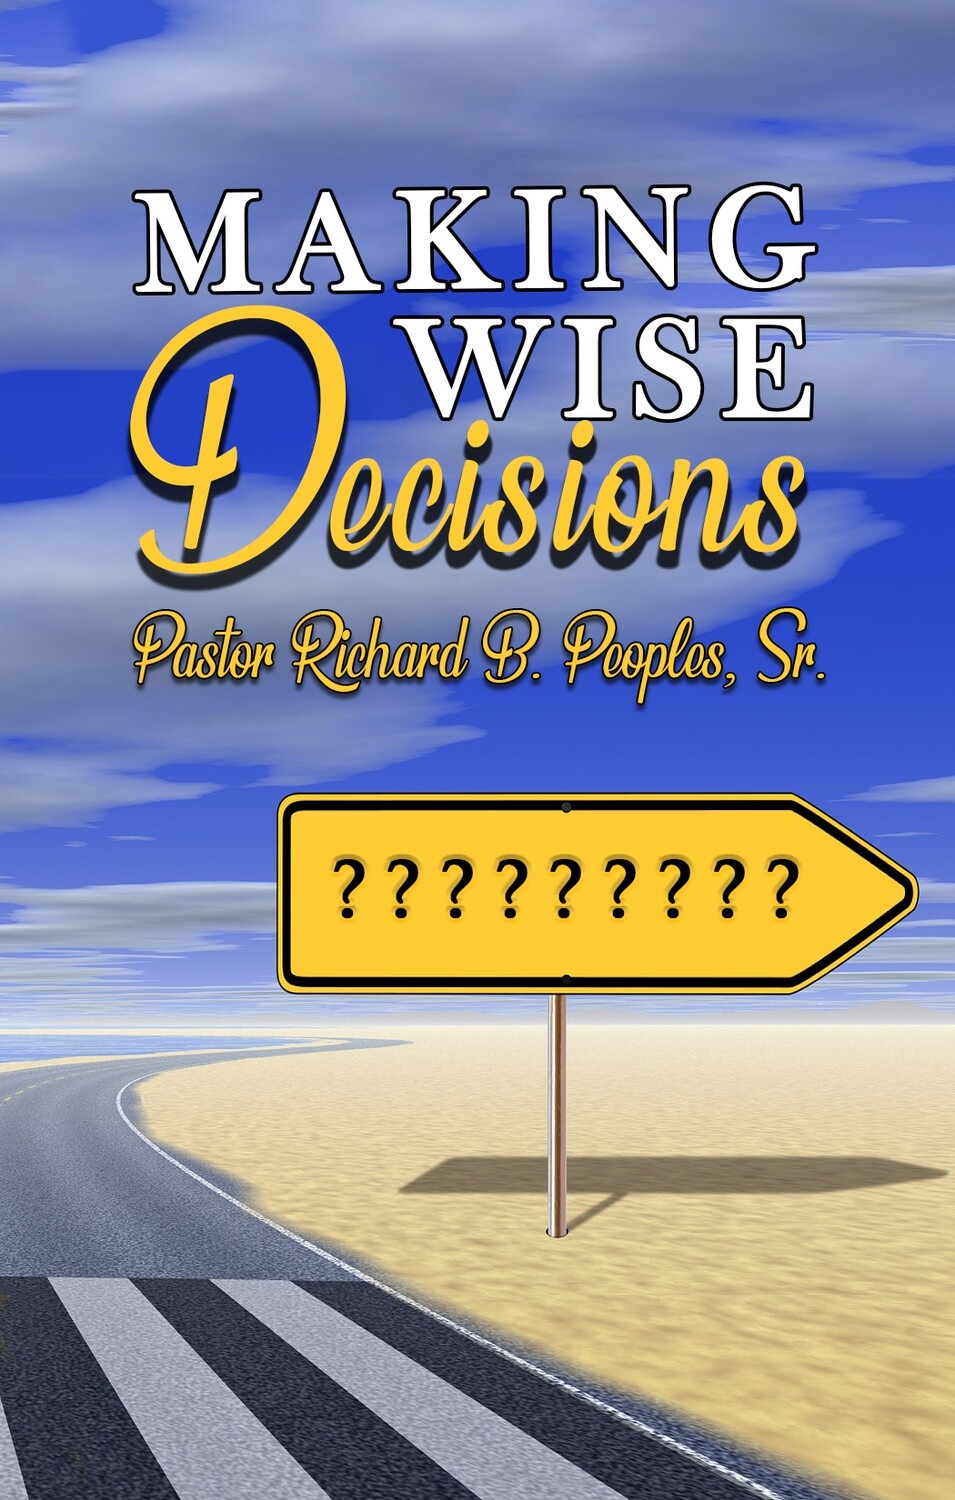 Making Wise Decisions